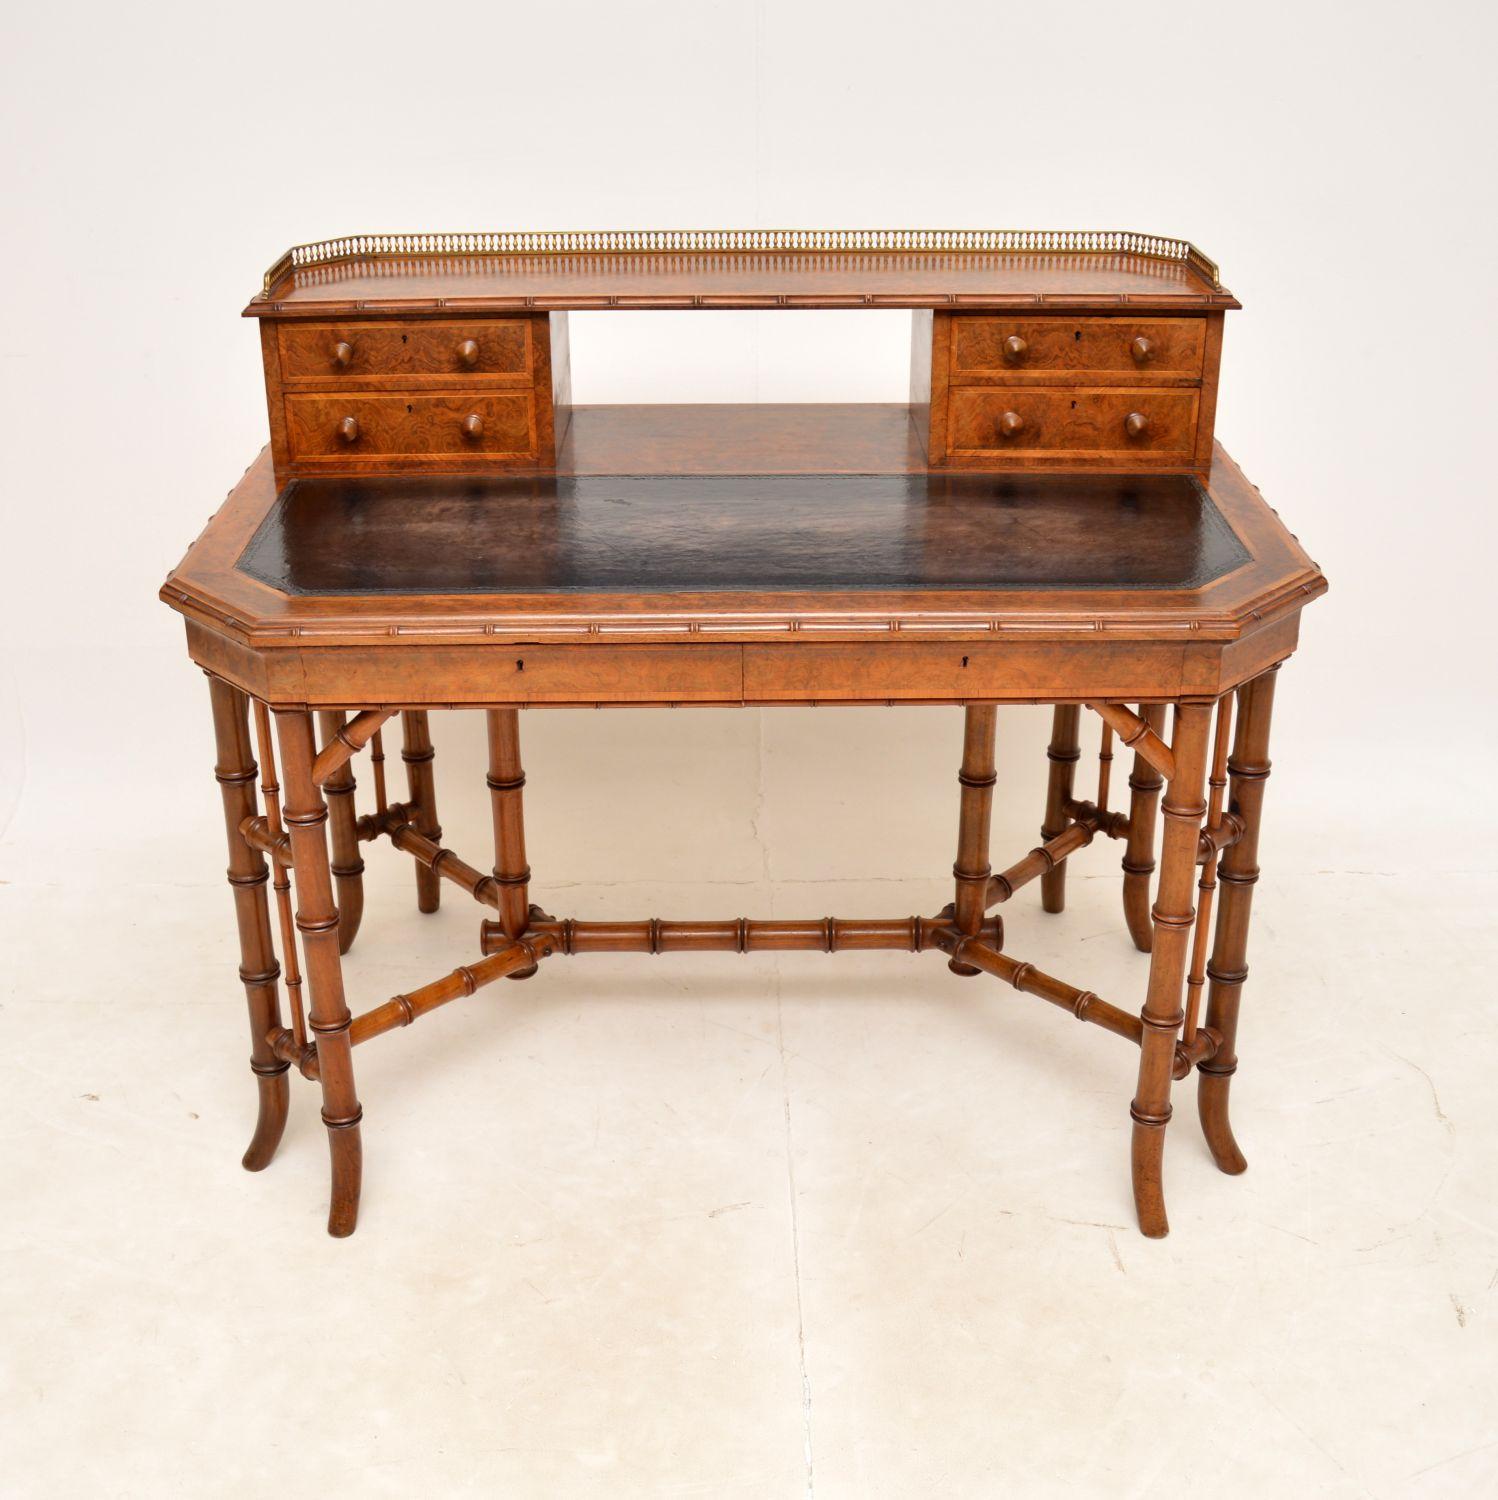 A magnificent and very rare antique desk of the highest quality. This was made in England by Howard and Sons, it dates from the 1860-1880 period.

This was likely a one off commissioned piece, it is extremely well made and has some lovely